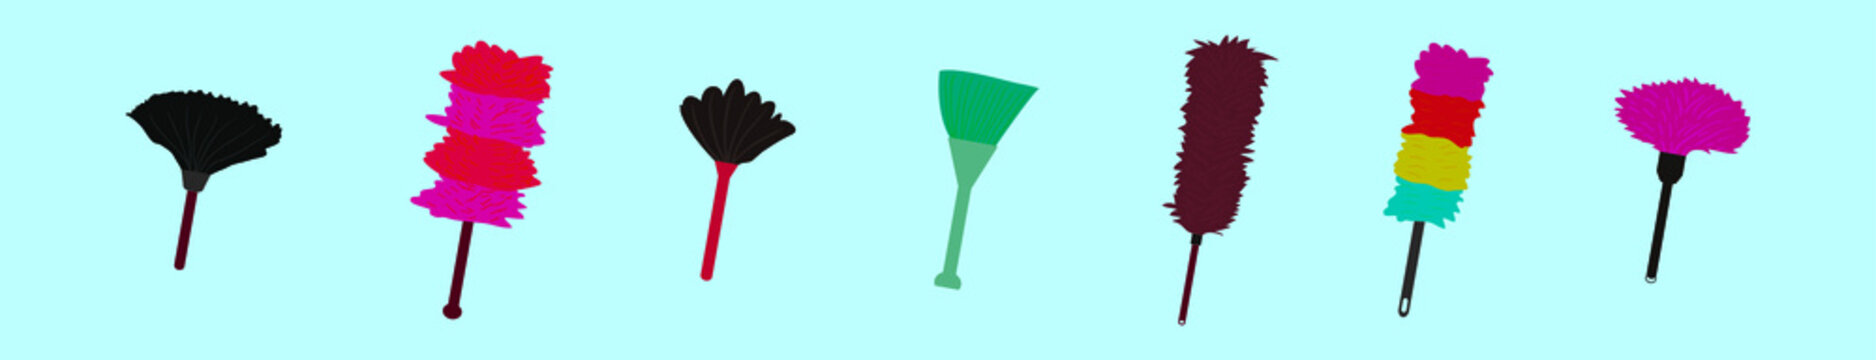 set of feather duster cartoon icon design template with various models. vector illustration isolated on blue background